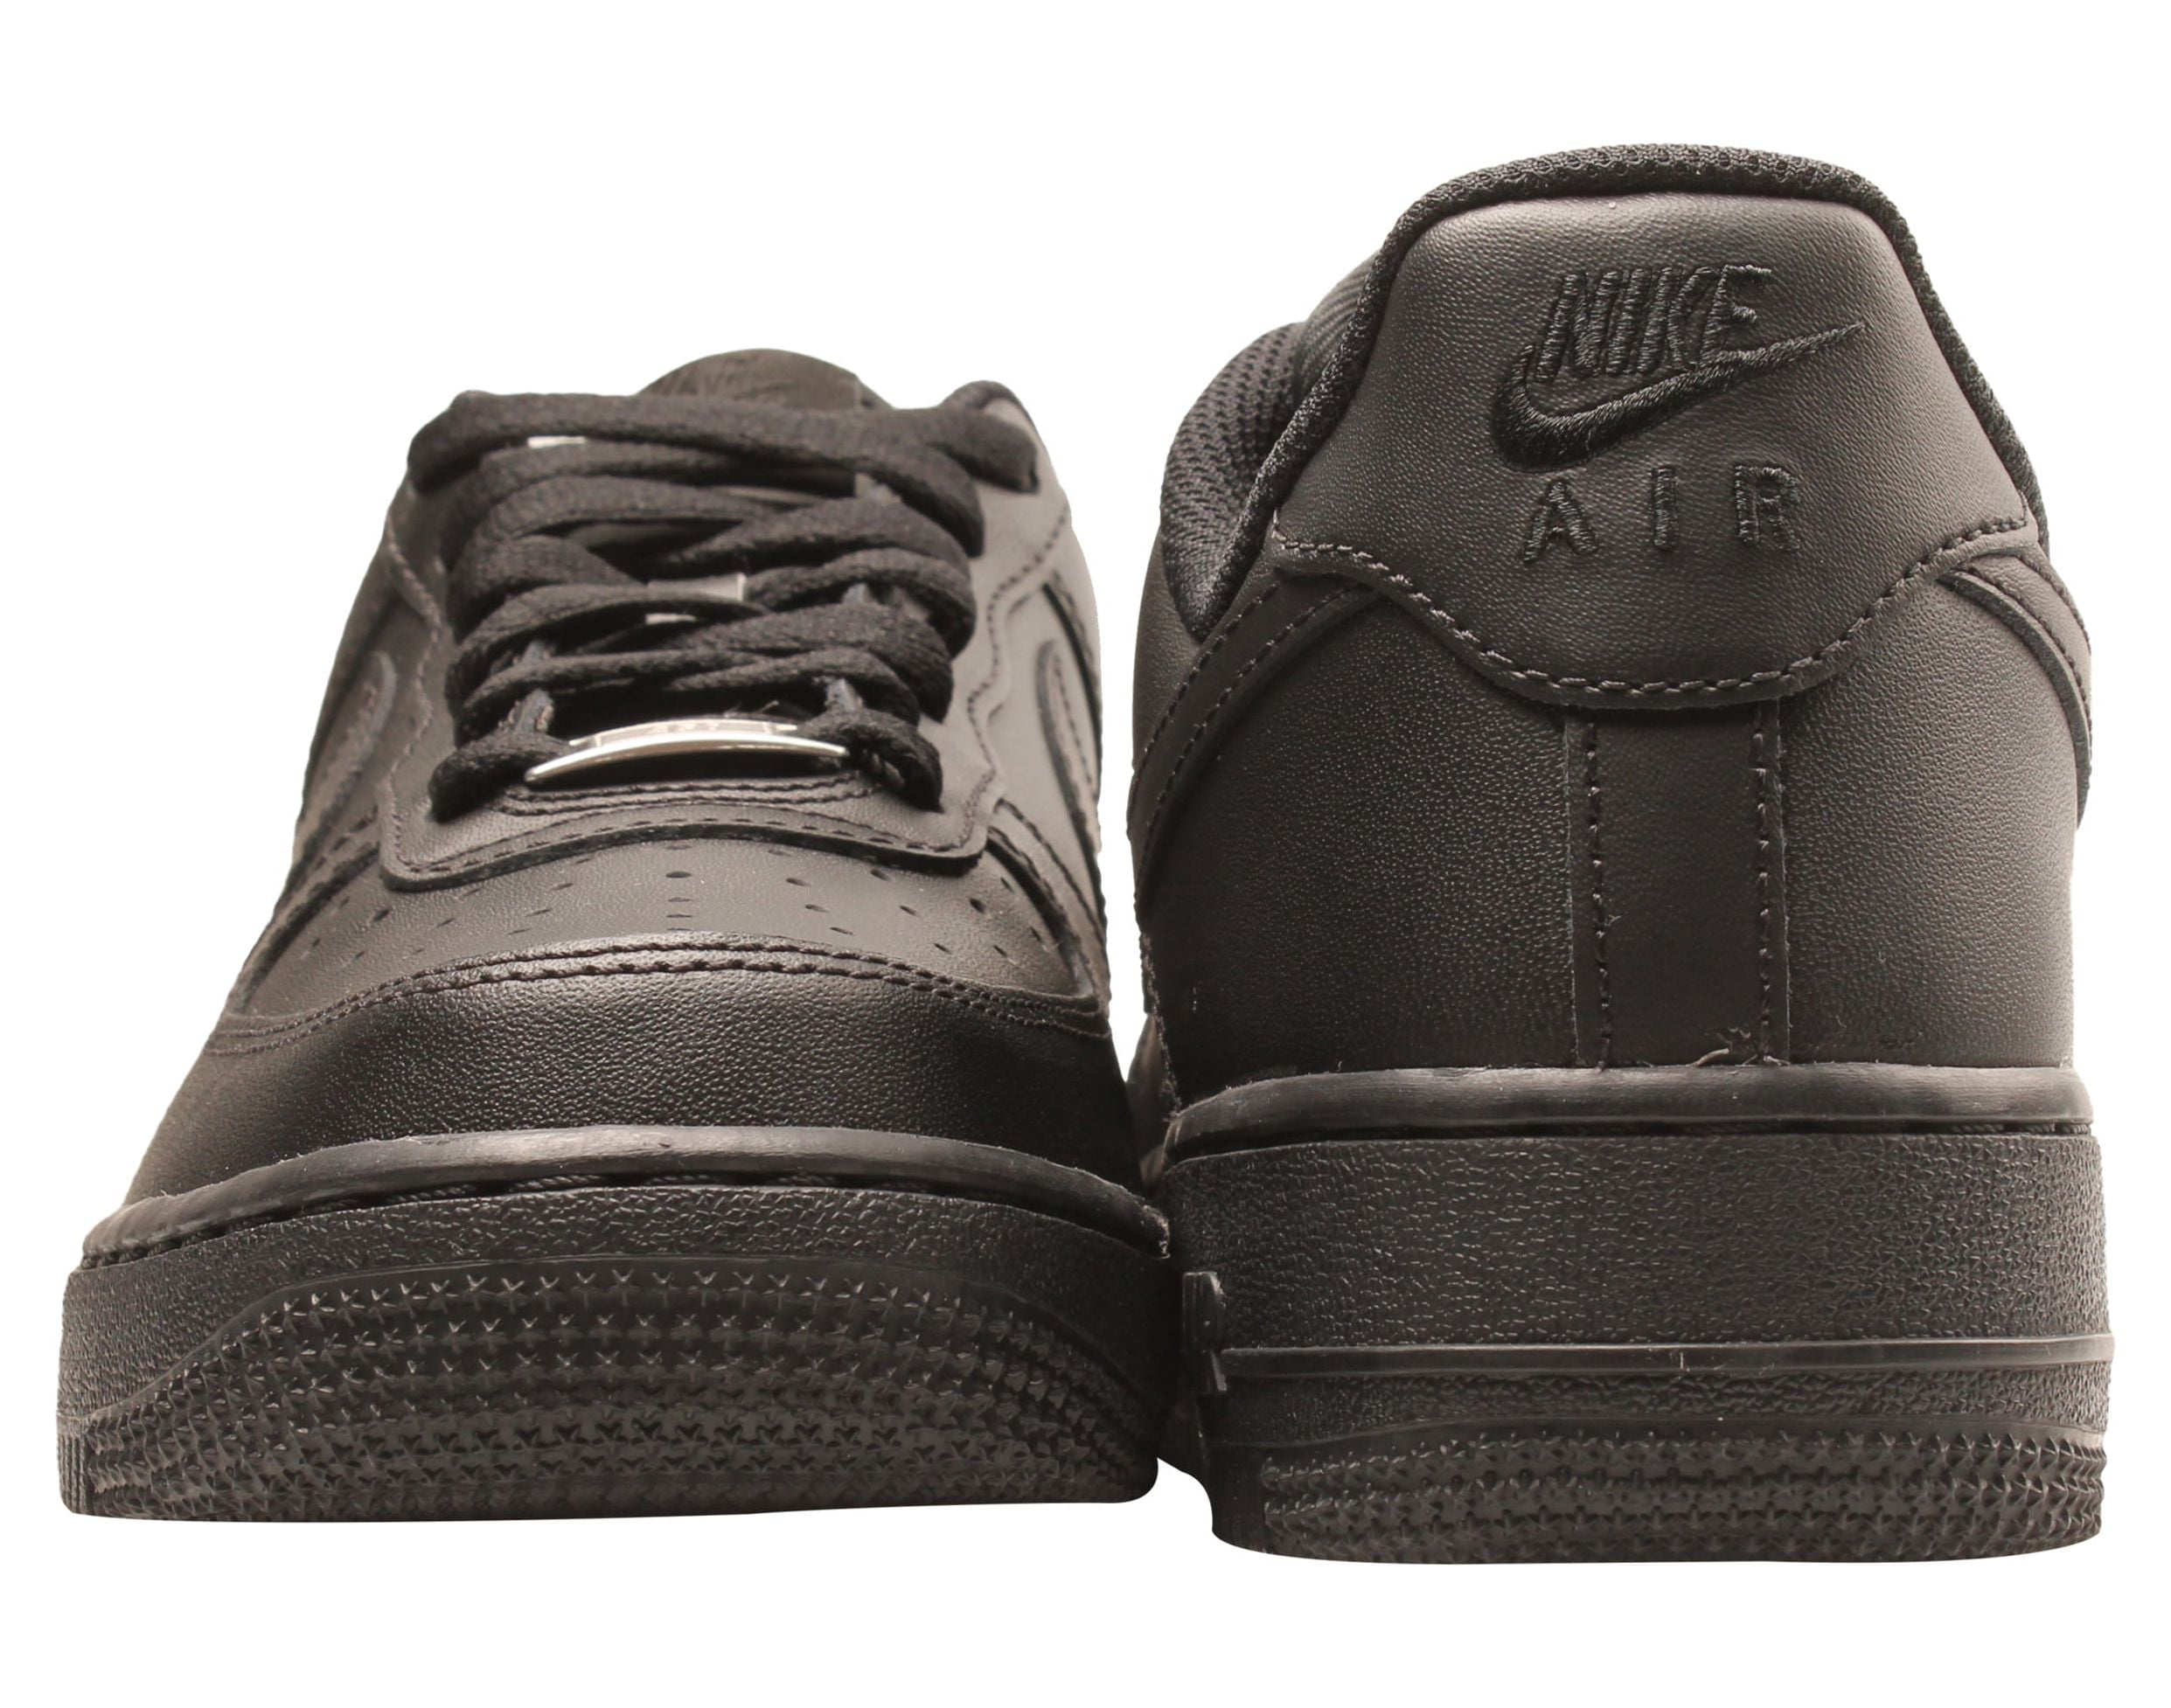  Nike Mens Air Force 1 '07 Lv8 1 Basketball Shoe (9) Black/White  : Clothing, Shoes & Jewelry